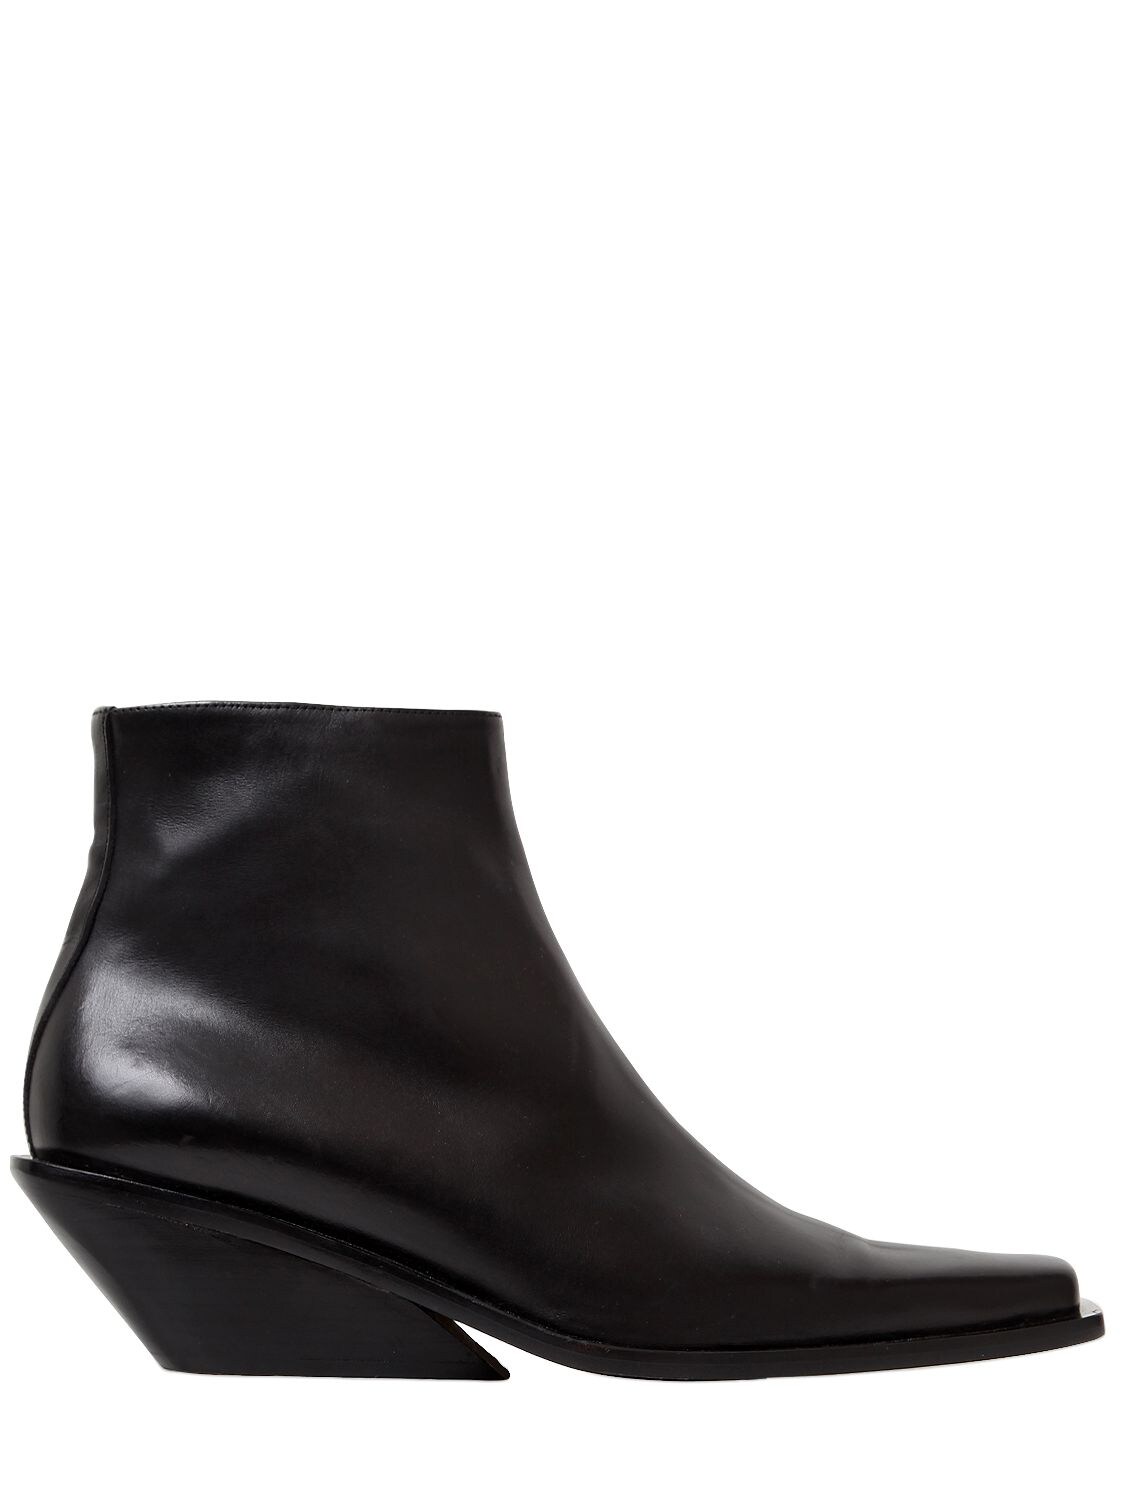 ANN DEMEULEMEESTER 60MM LEATHER ANKLE BOOTS,67I02U006-MDk50